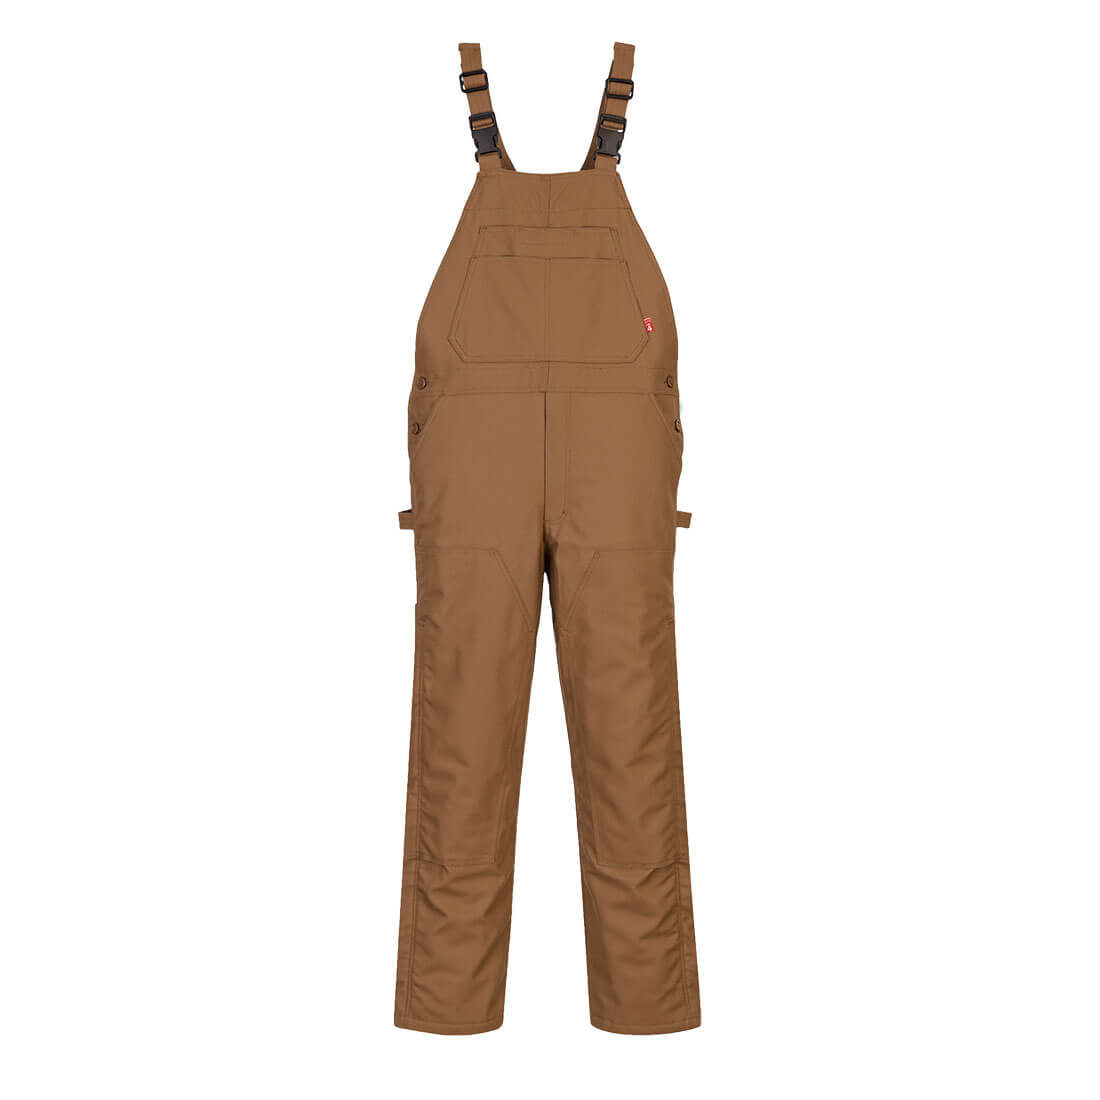 FR Duck Lined Overall, Brown      Size XXL R/Fit